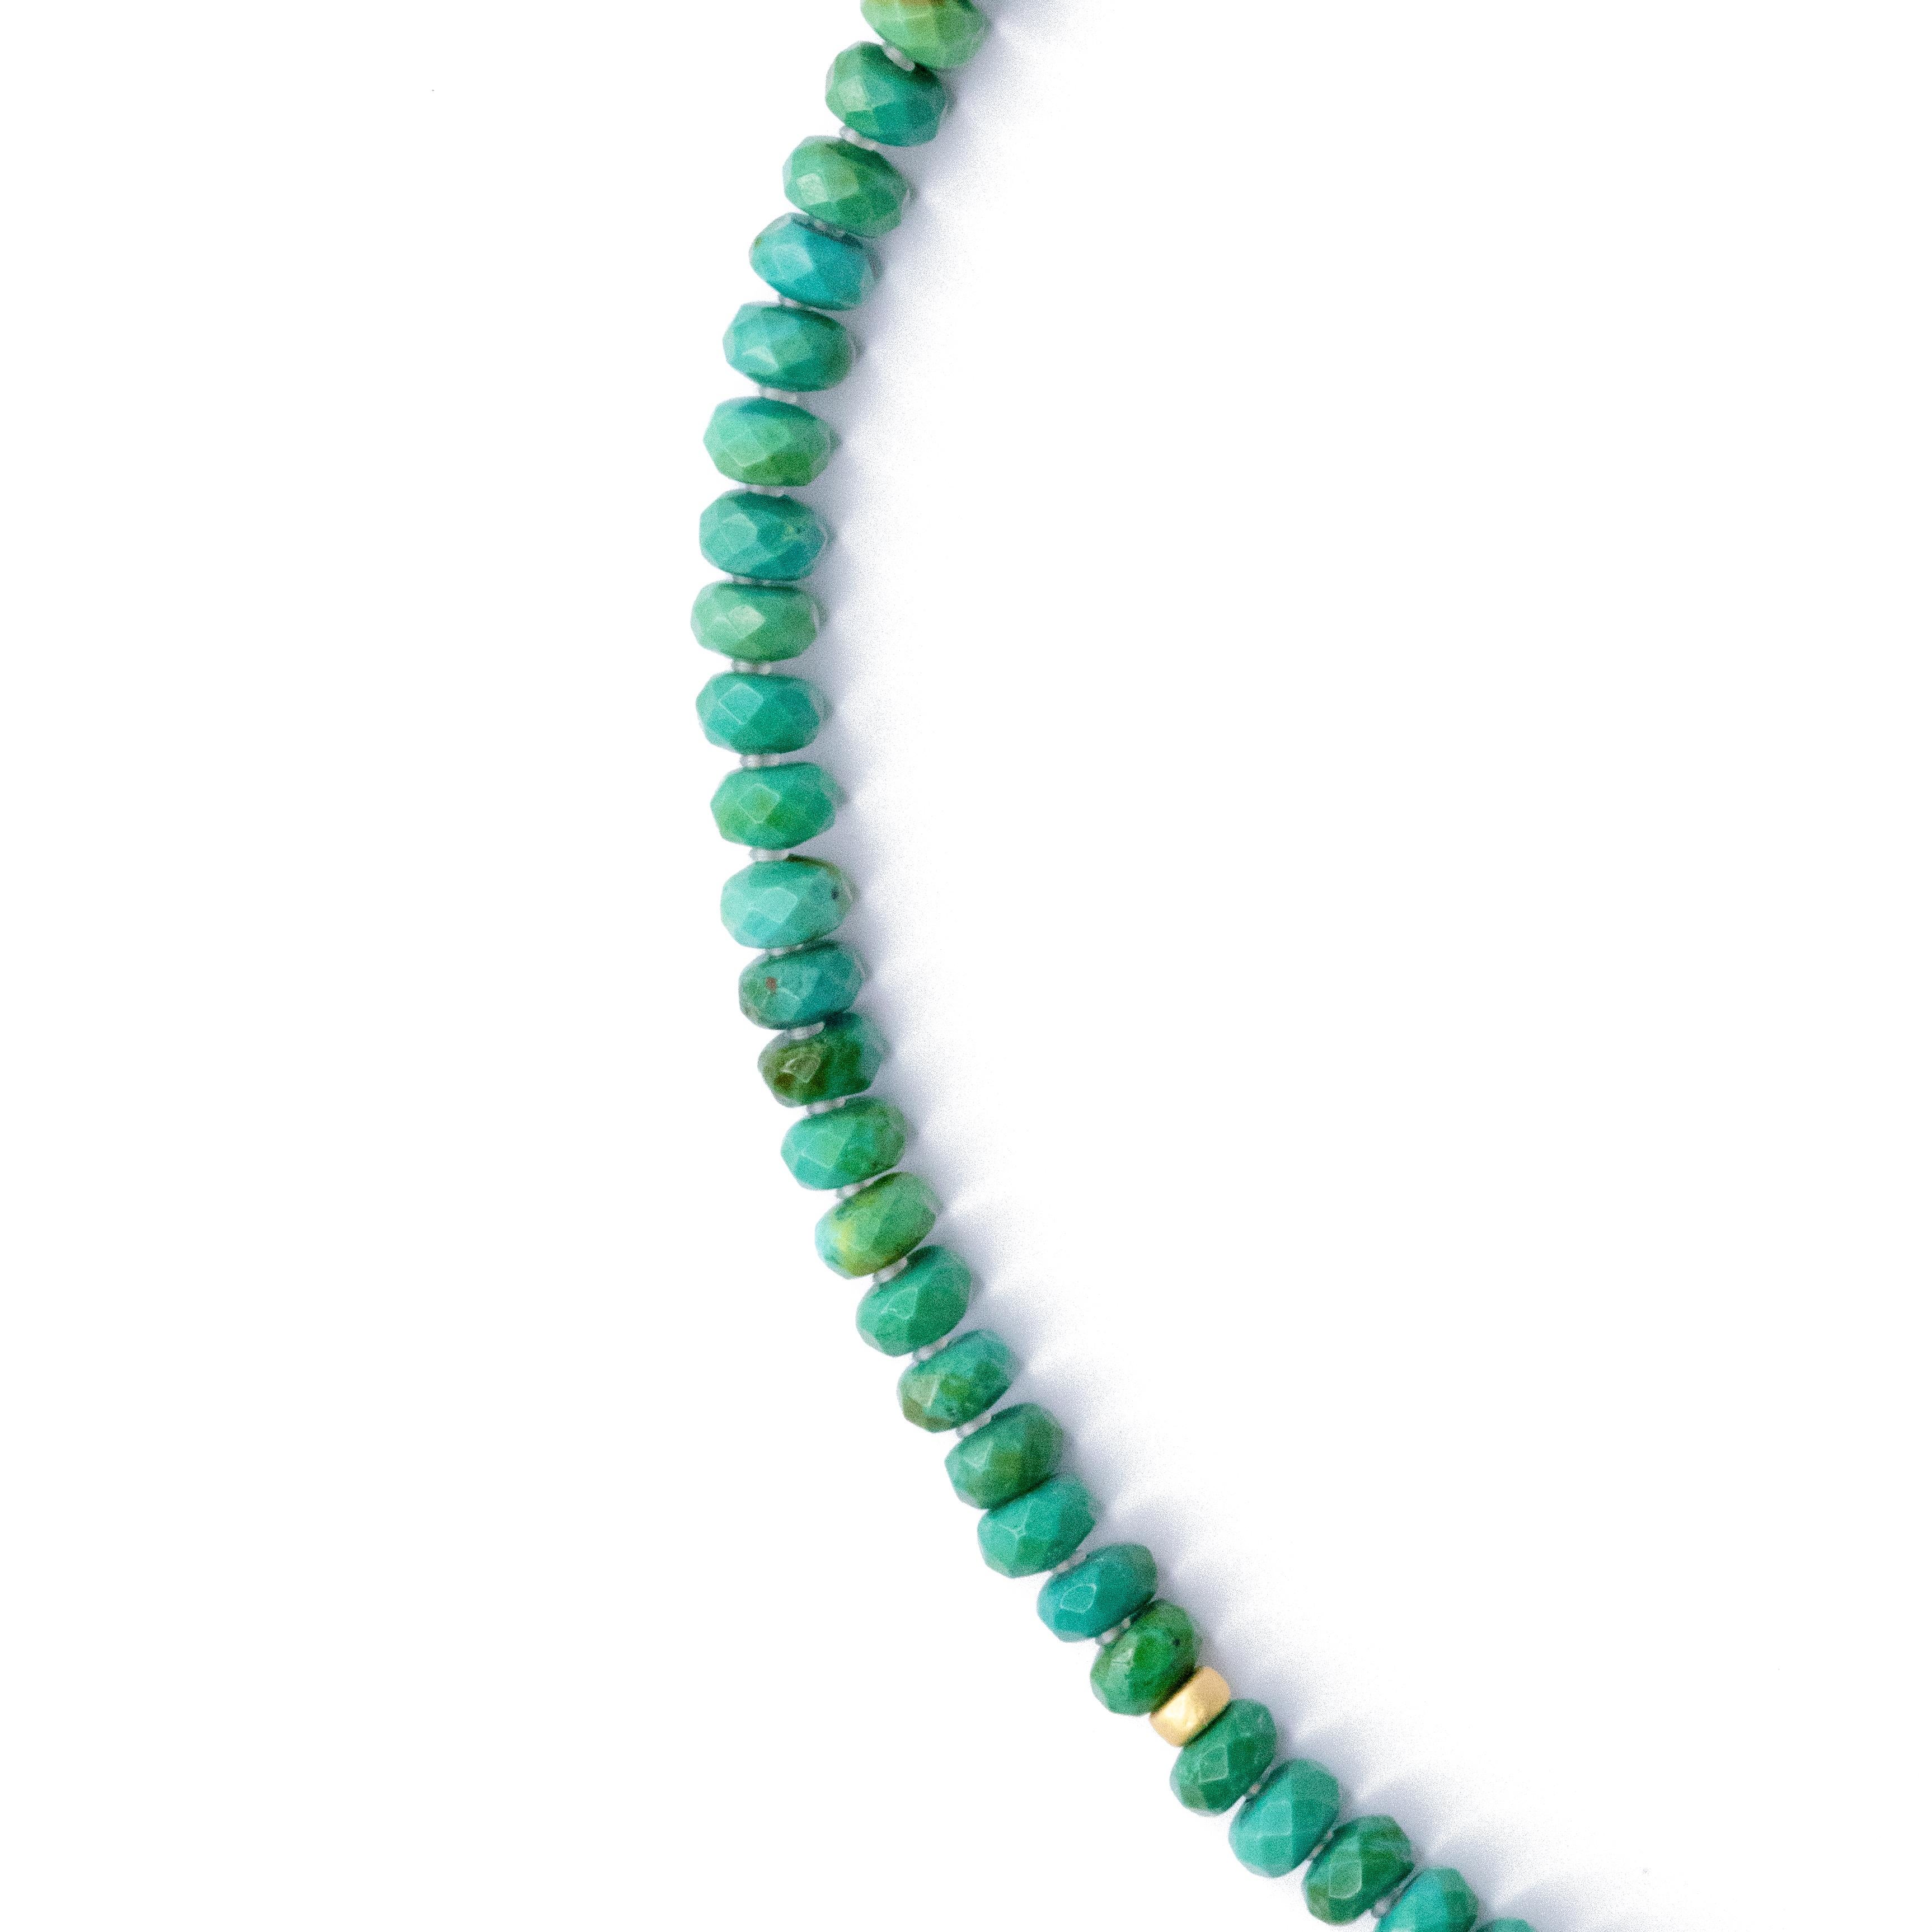 Necklace featuring graduated Green Turquoise. Fastens with a 20K Gold Plated Sterling Silver hook closure.
	•	16